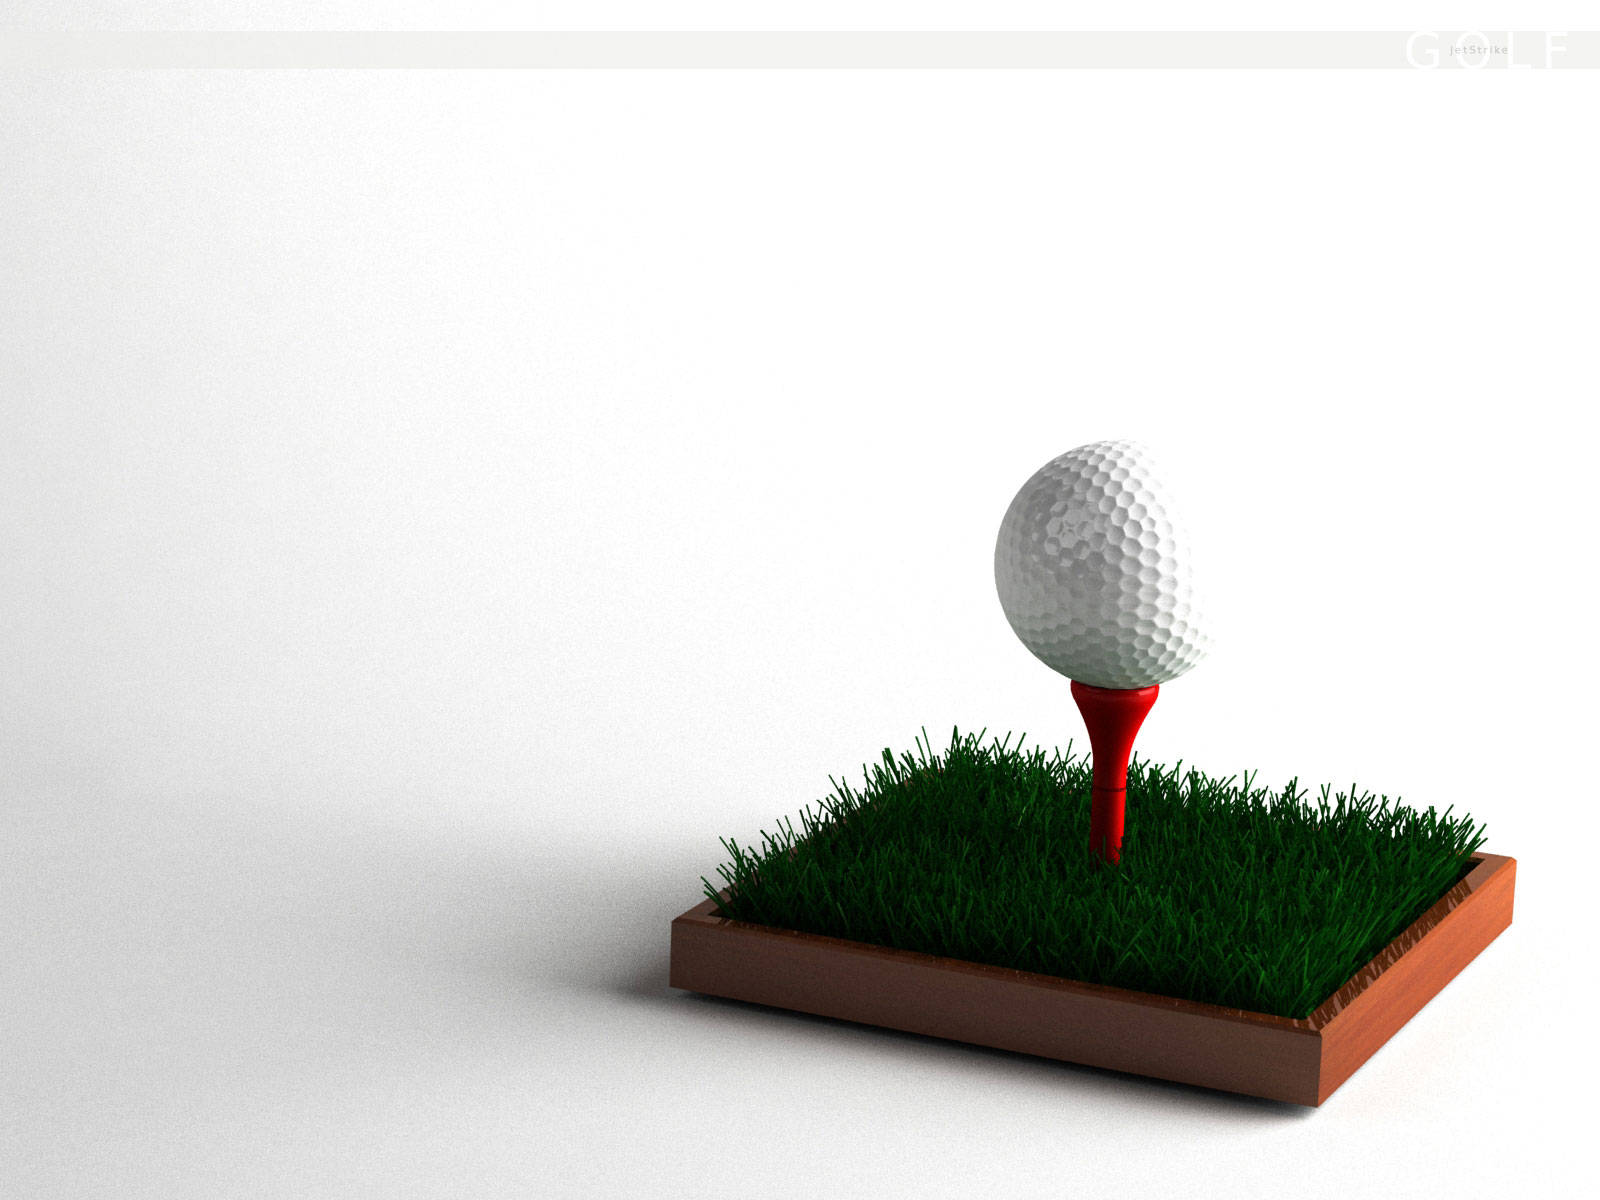 Golf Ball And Tee On Golf Course Patch Background